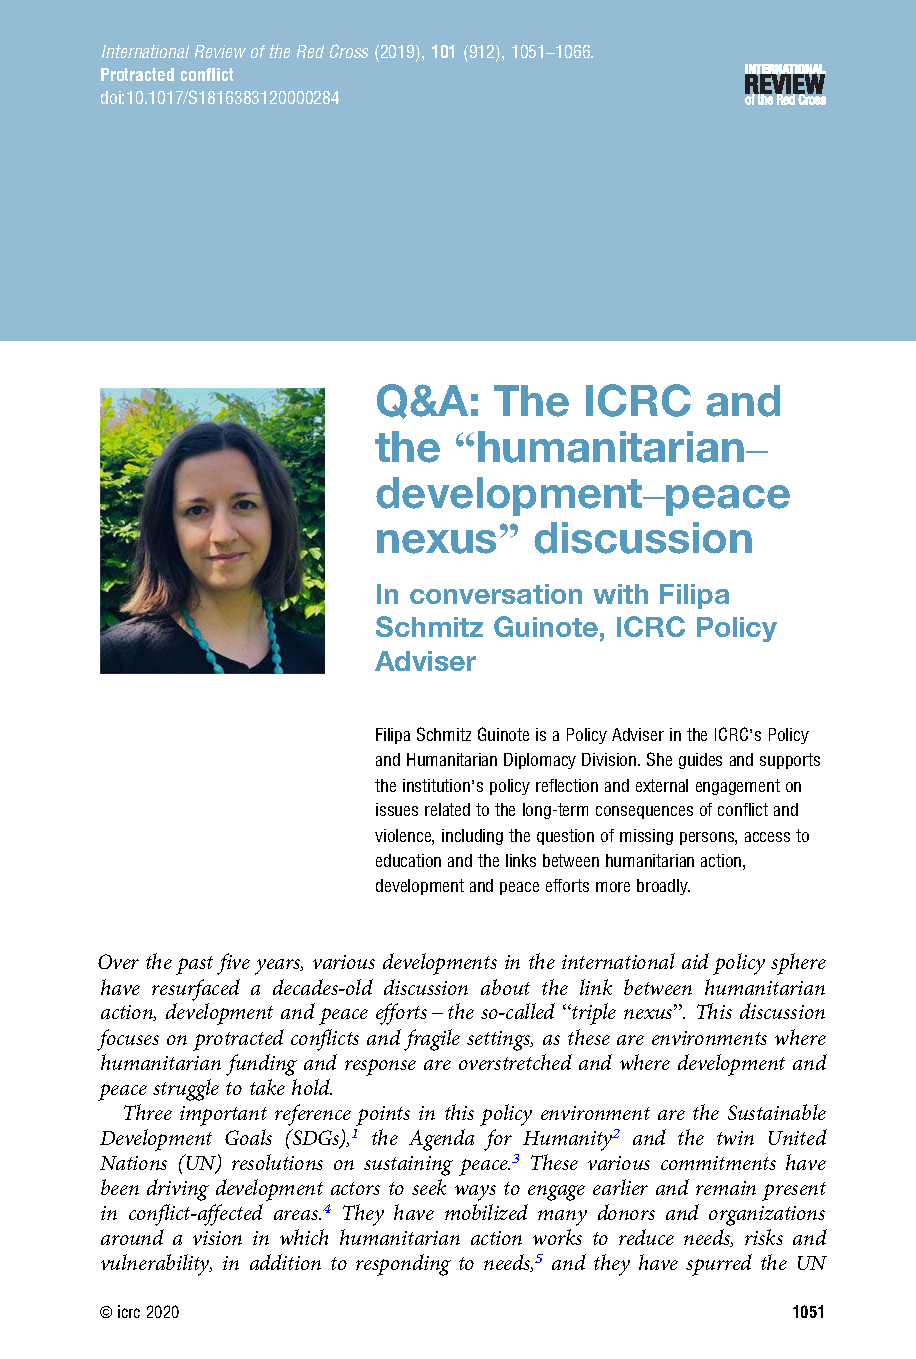 Cover page for Q&A: The ICRC and the “Humanitarian-Development–Peace Nexus” Discussion